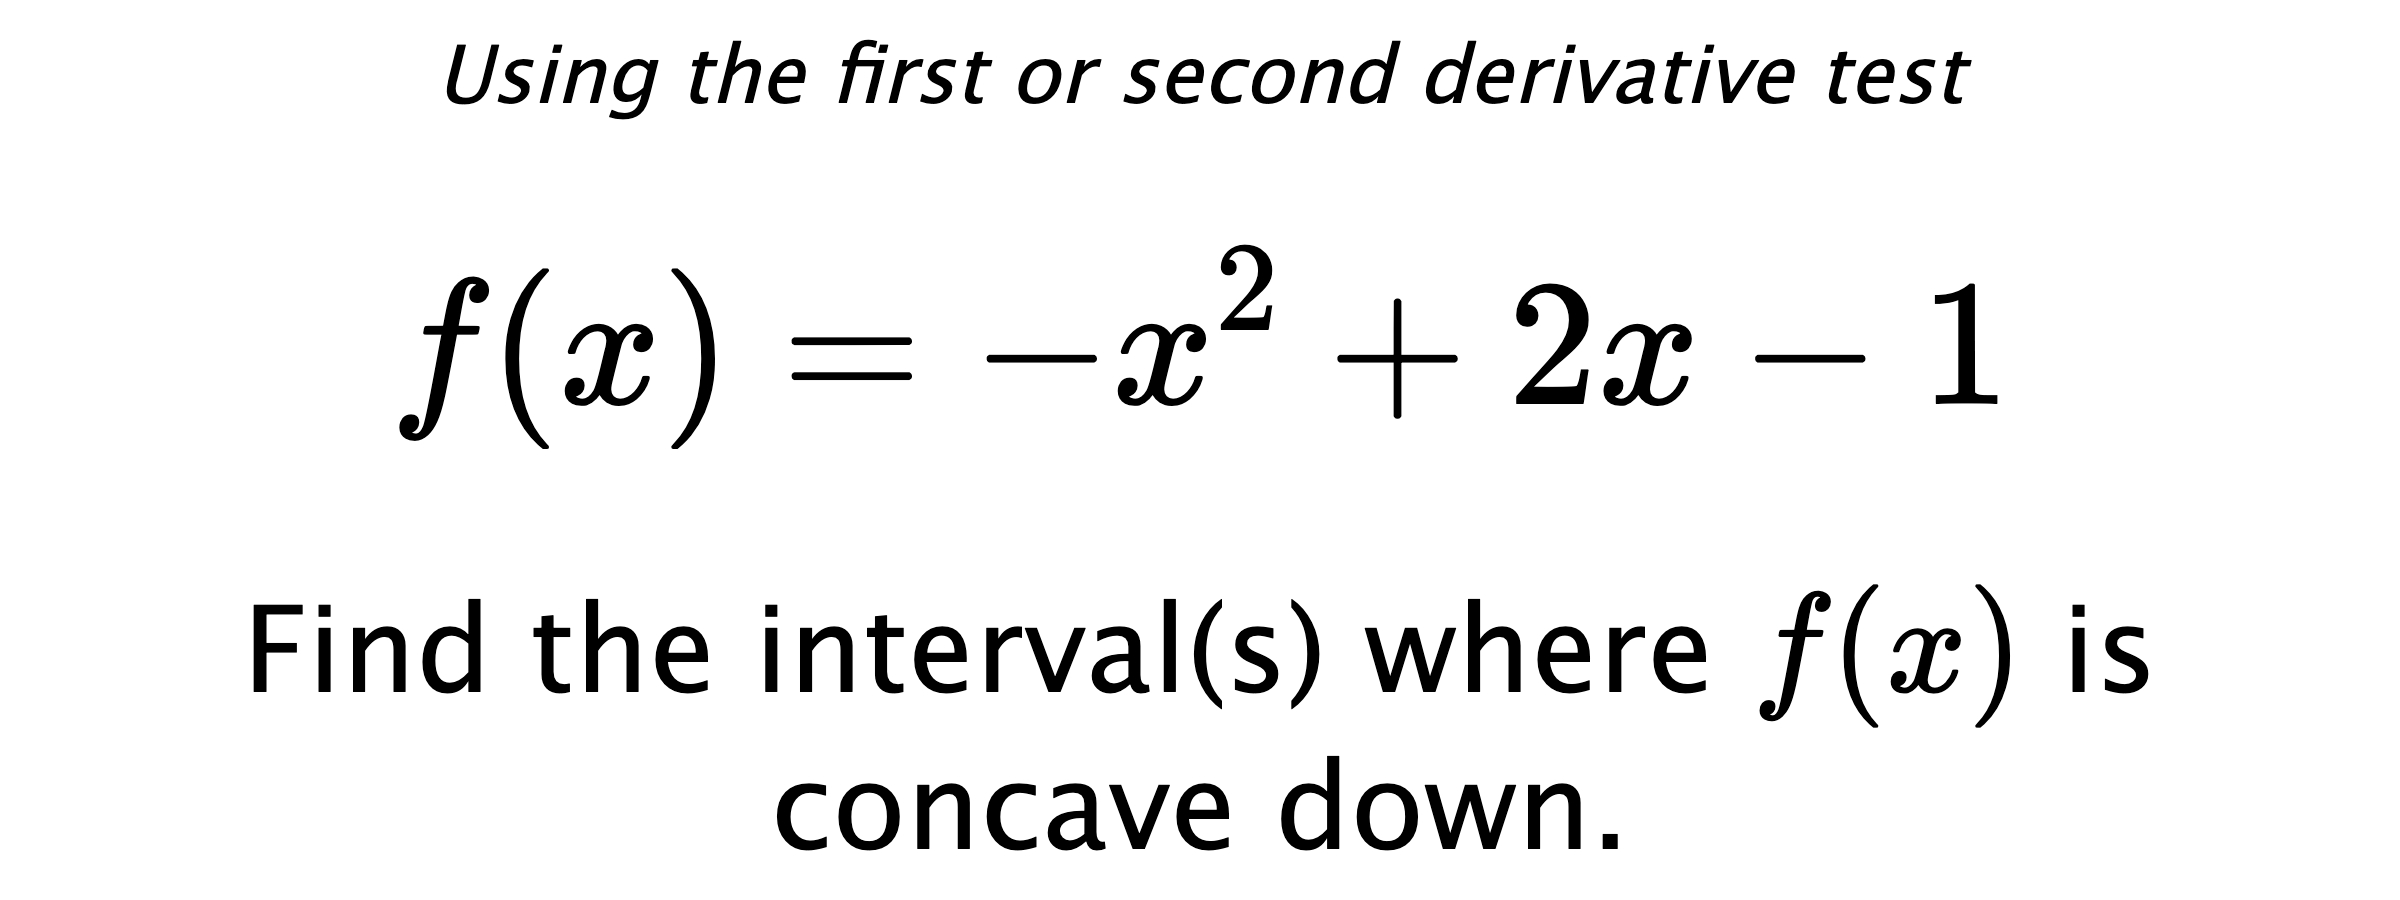 Using the first or second derivative test $$ f(x)=-x^2+2x-1 $$ Find the interval(s) where  $ f(x) $ is concave down.